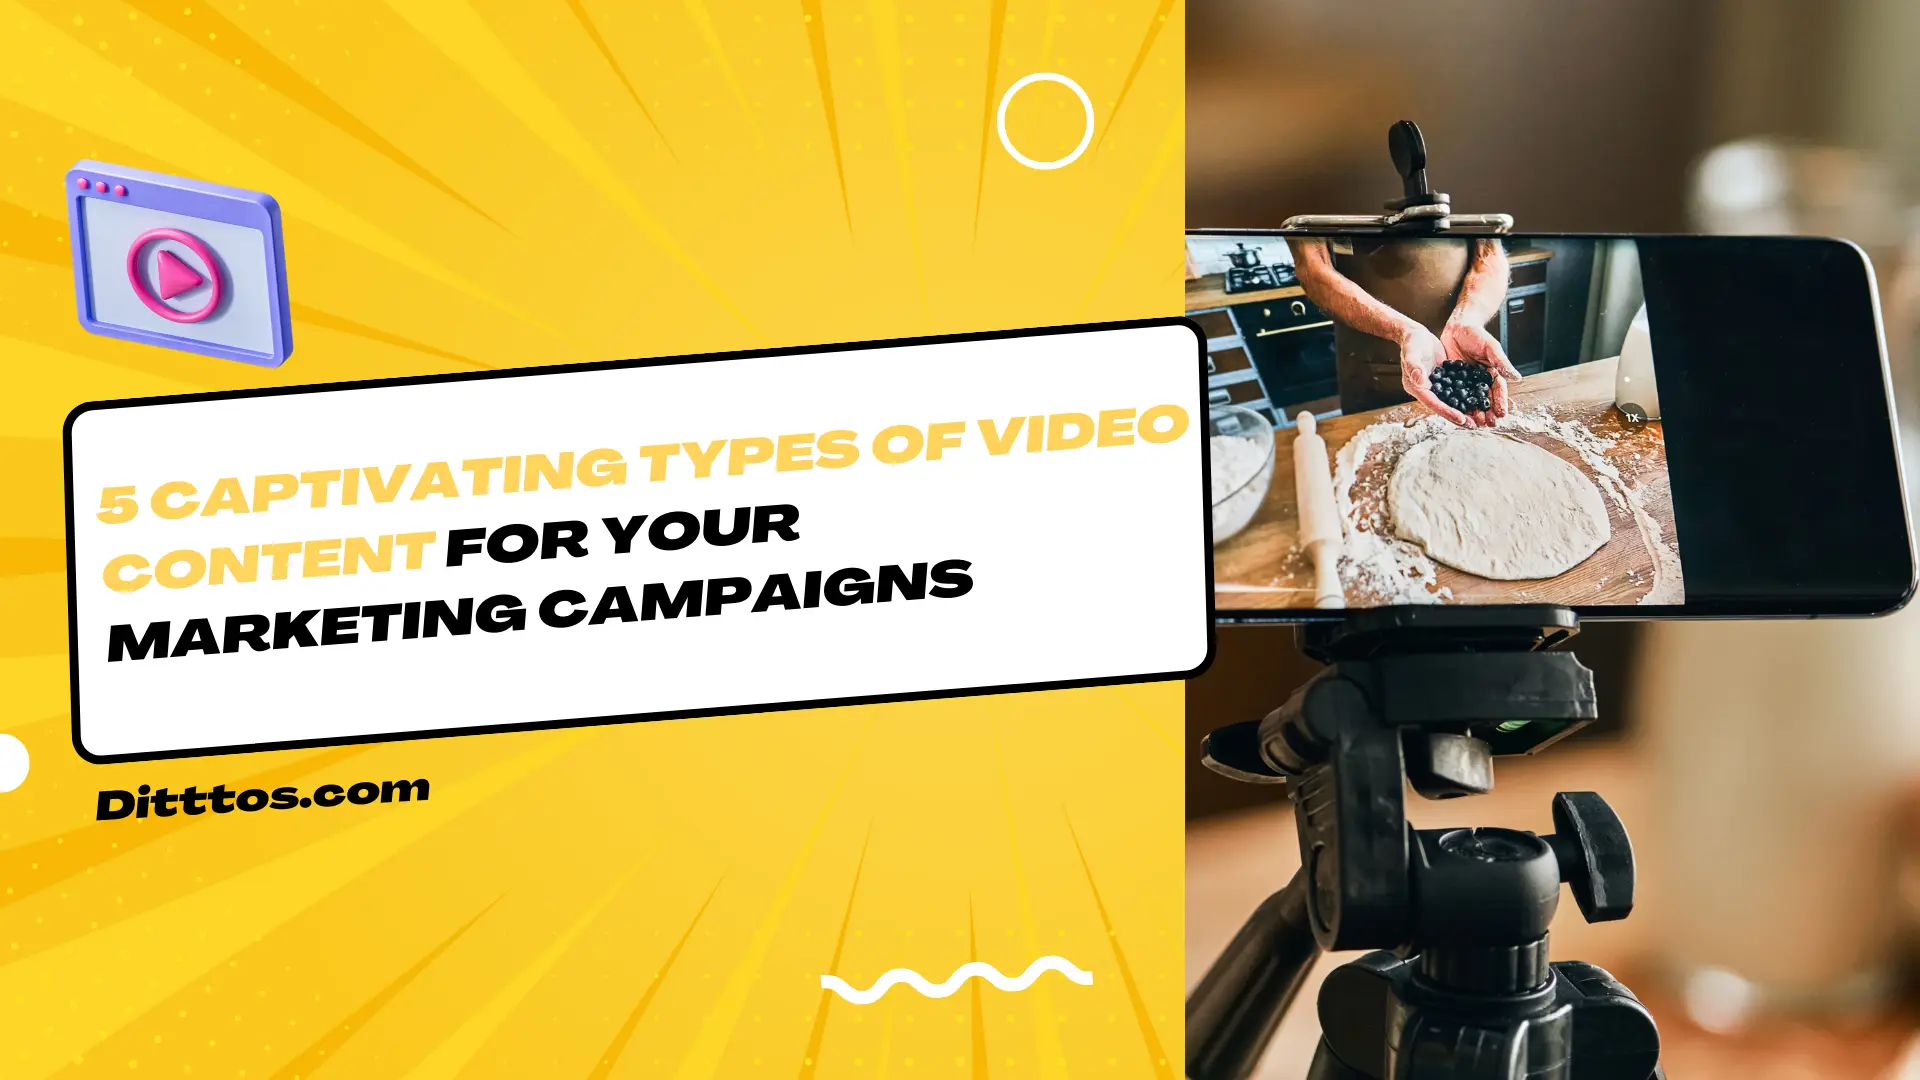 5 Captivating Types of Video Content for Your Marketing Campaigns